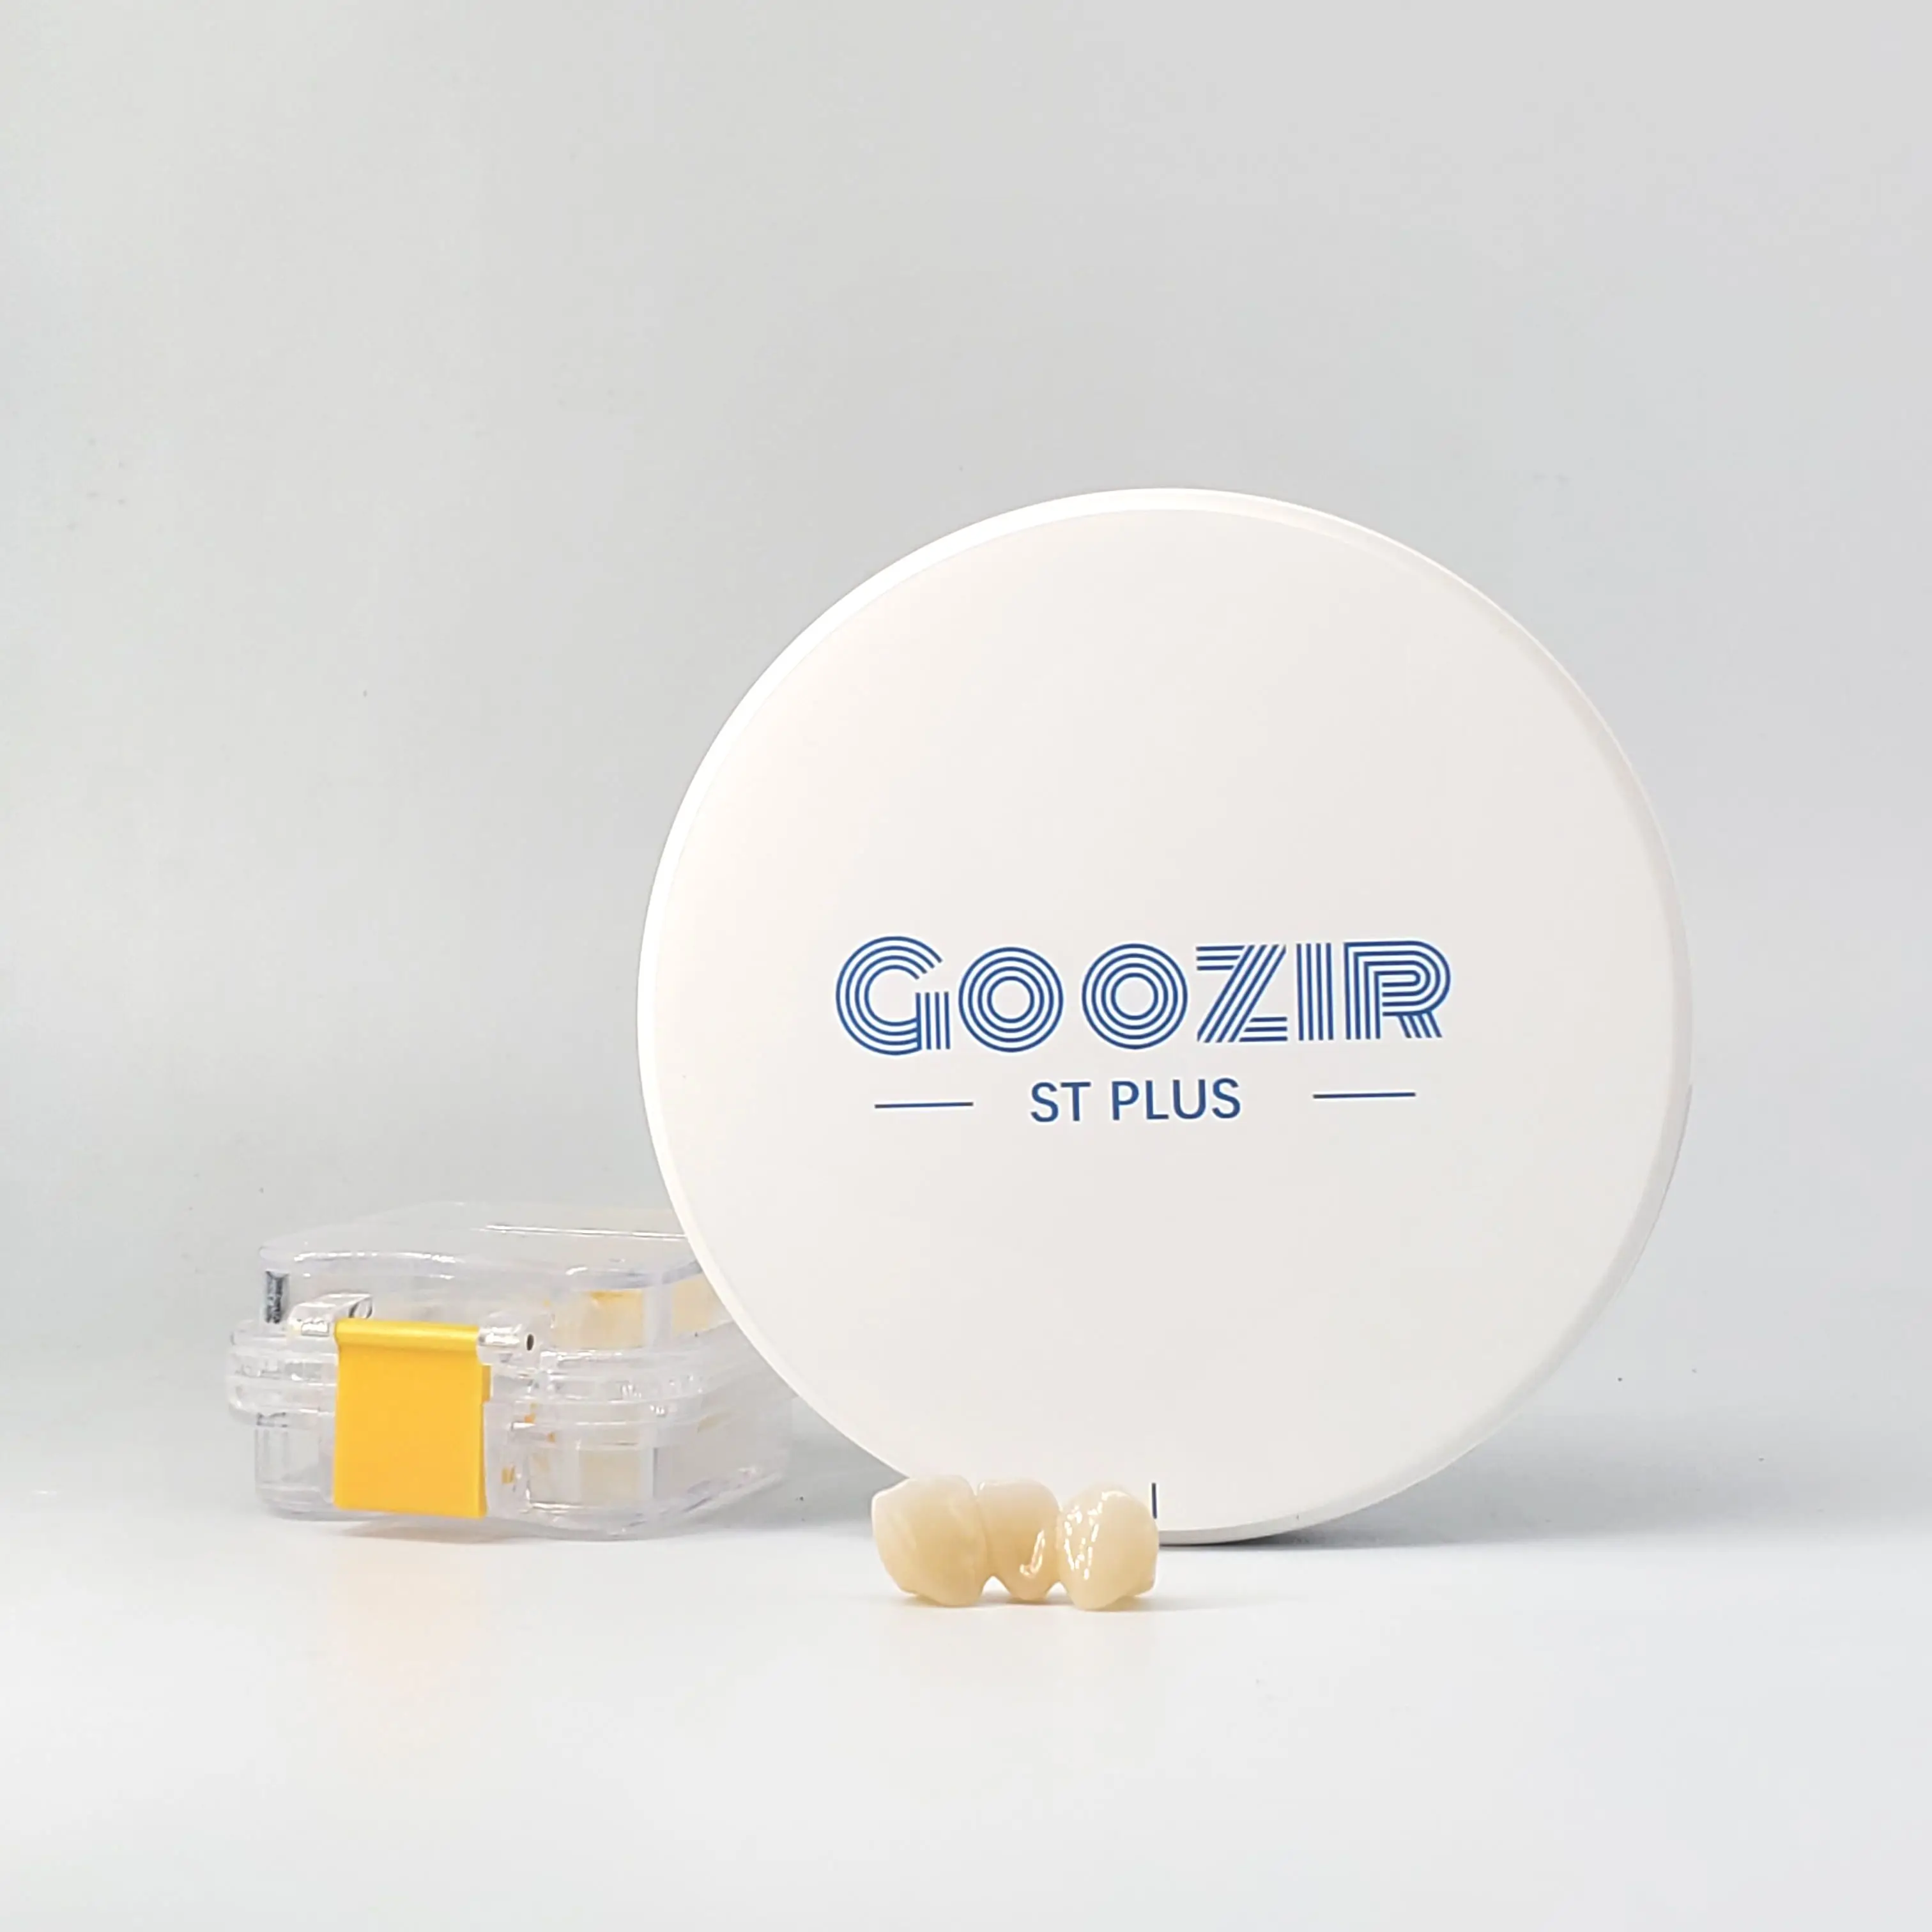 

GOOZIR 98MM ST PLUS White A2 Dental Zirconia Open System Cad Cam Material With High Strength 1200 MPa Transmittance 43% For Lab